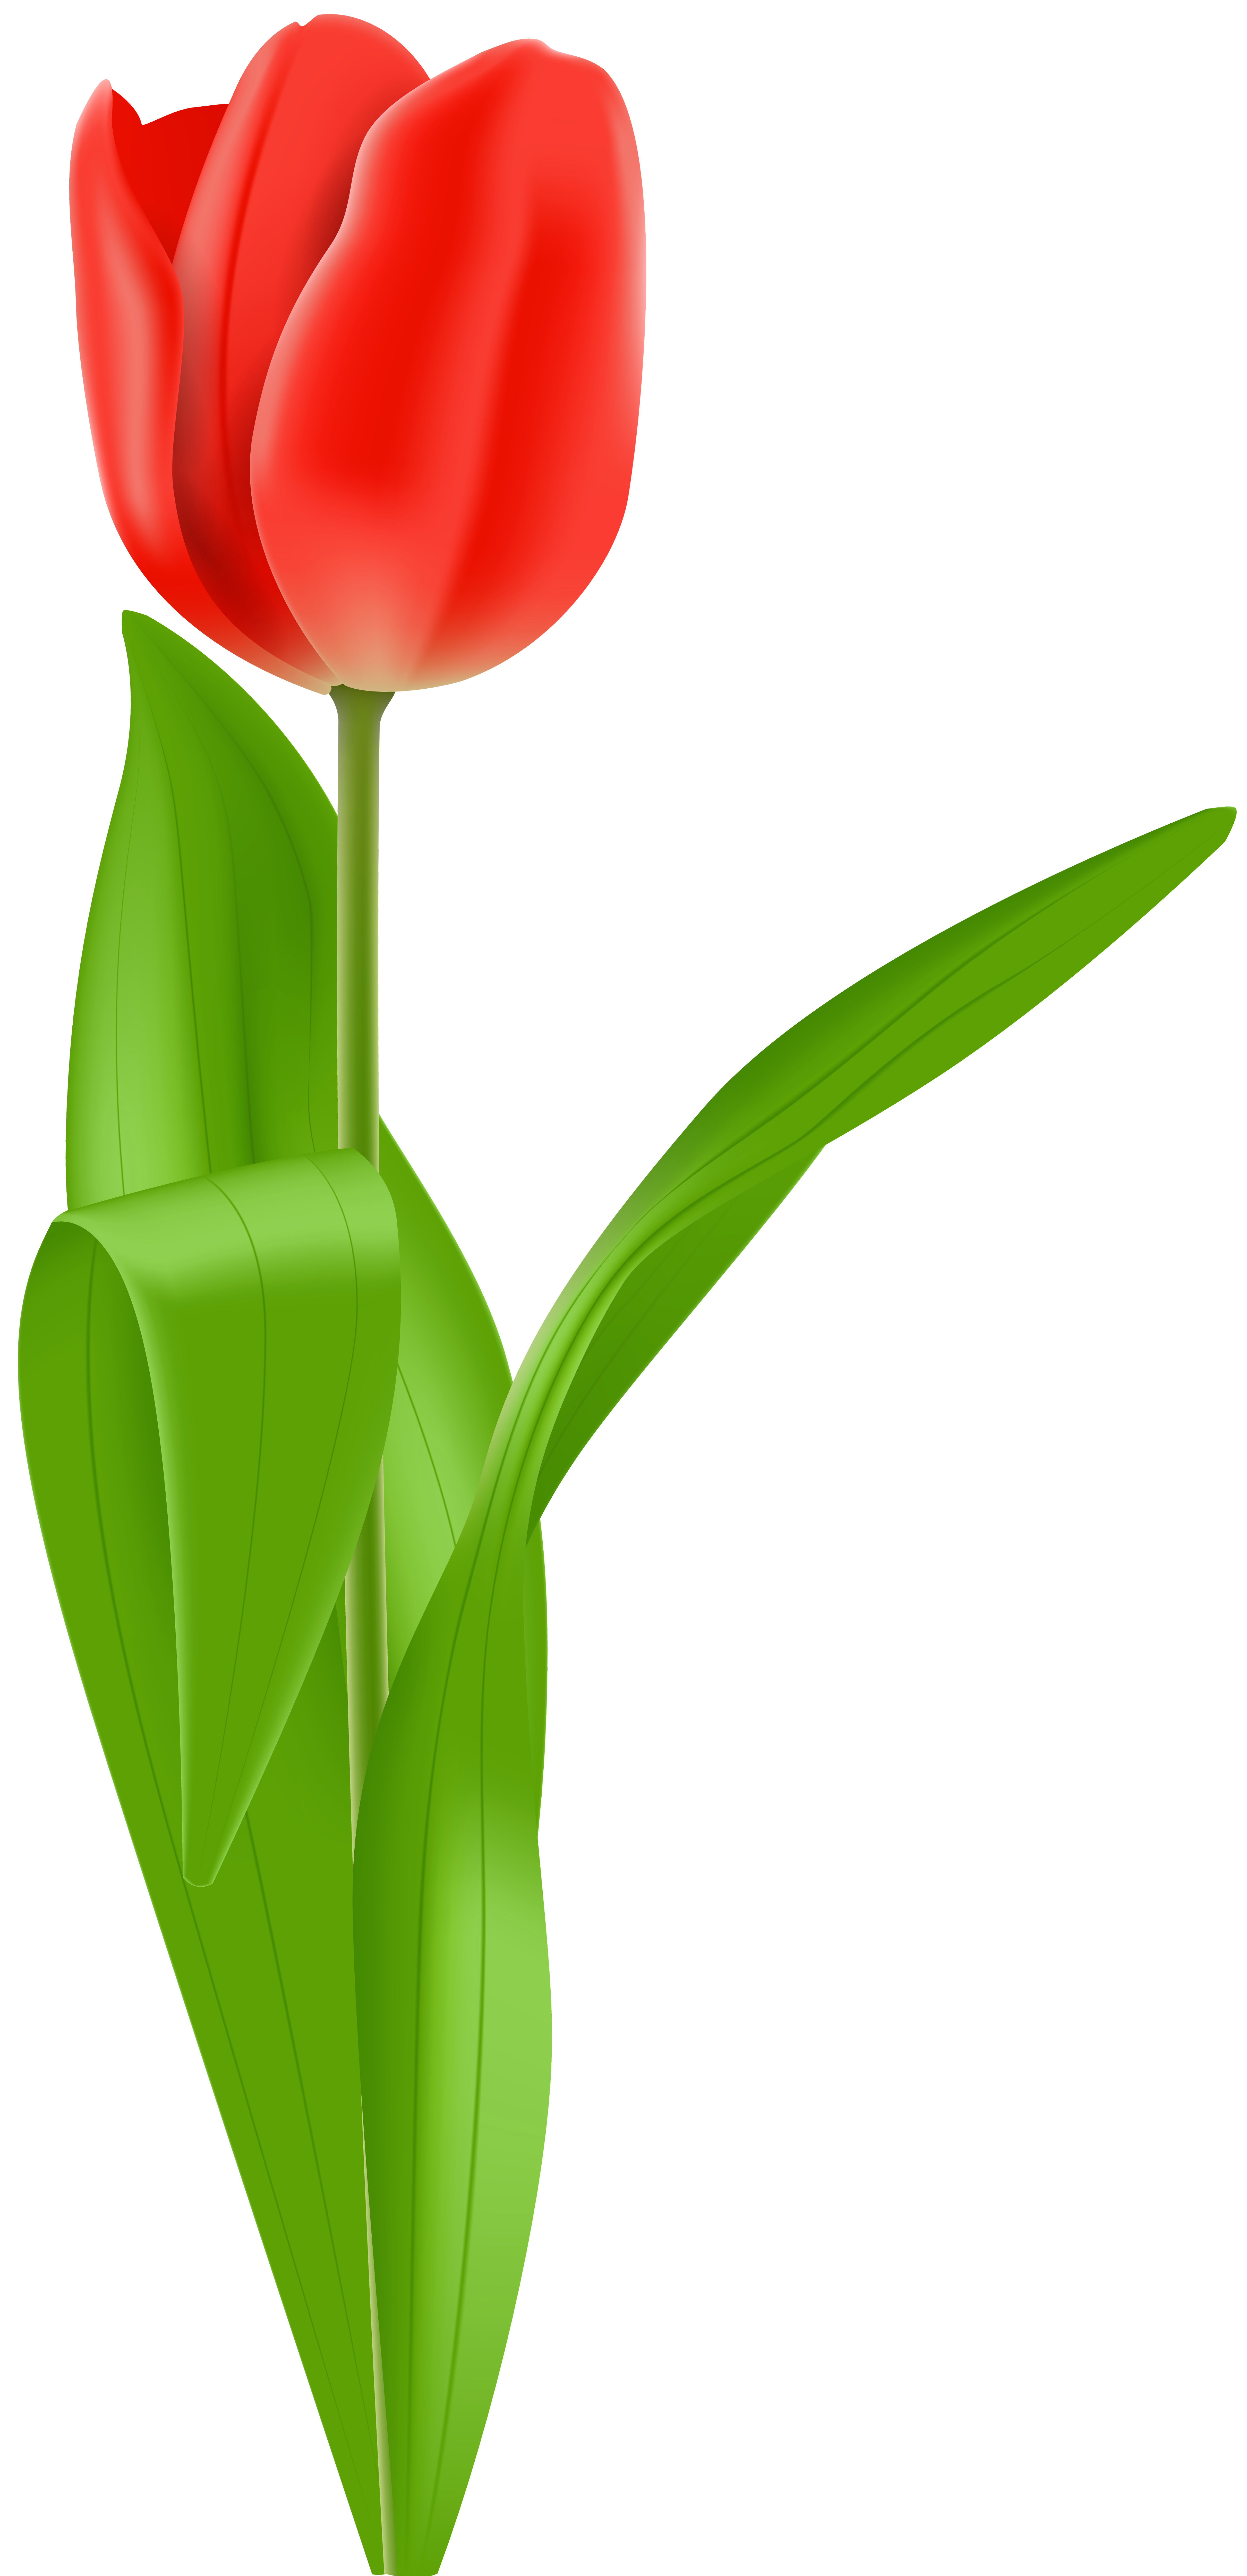 Red Tulip PNG Clip Art Image | Gallery Yopriceville - High-Quality ...